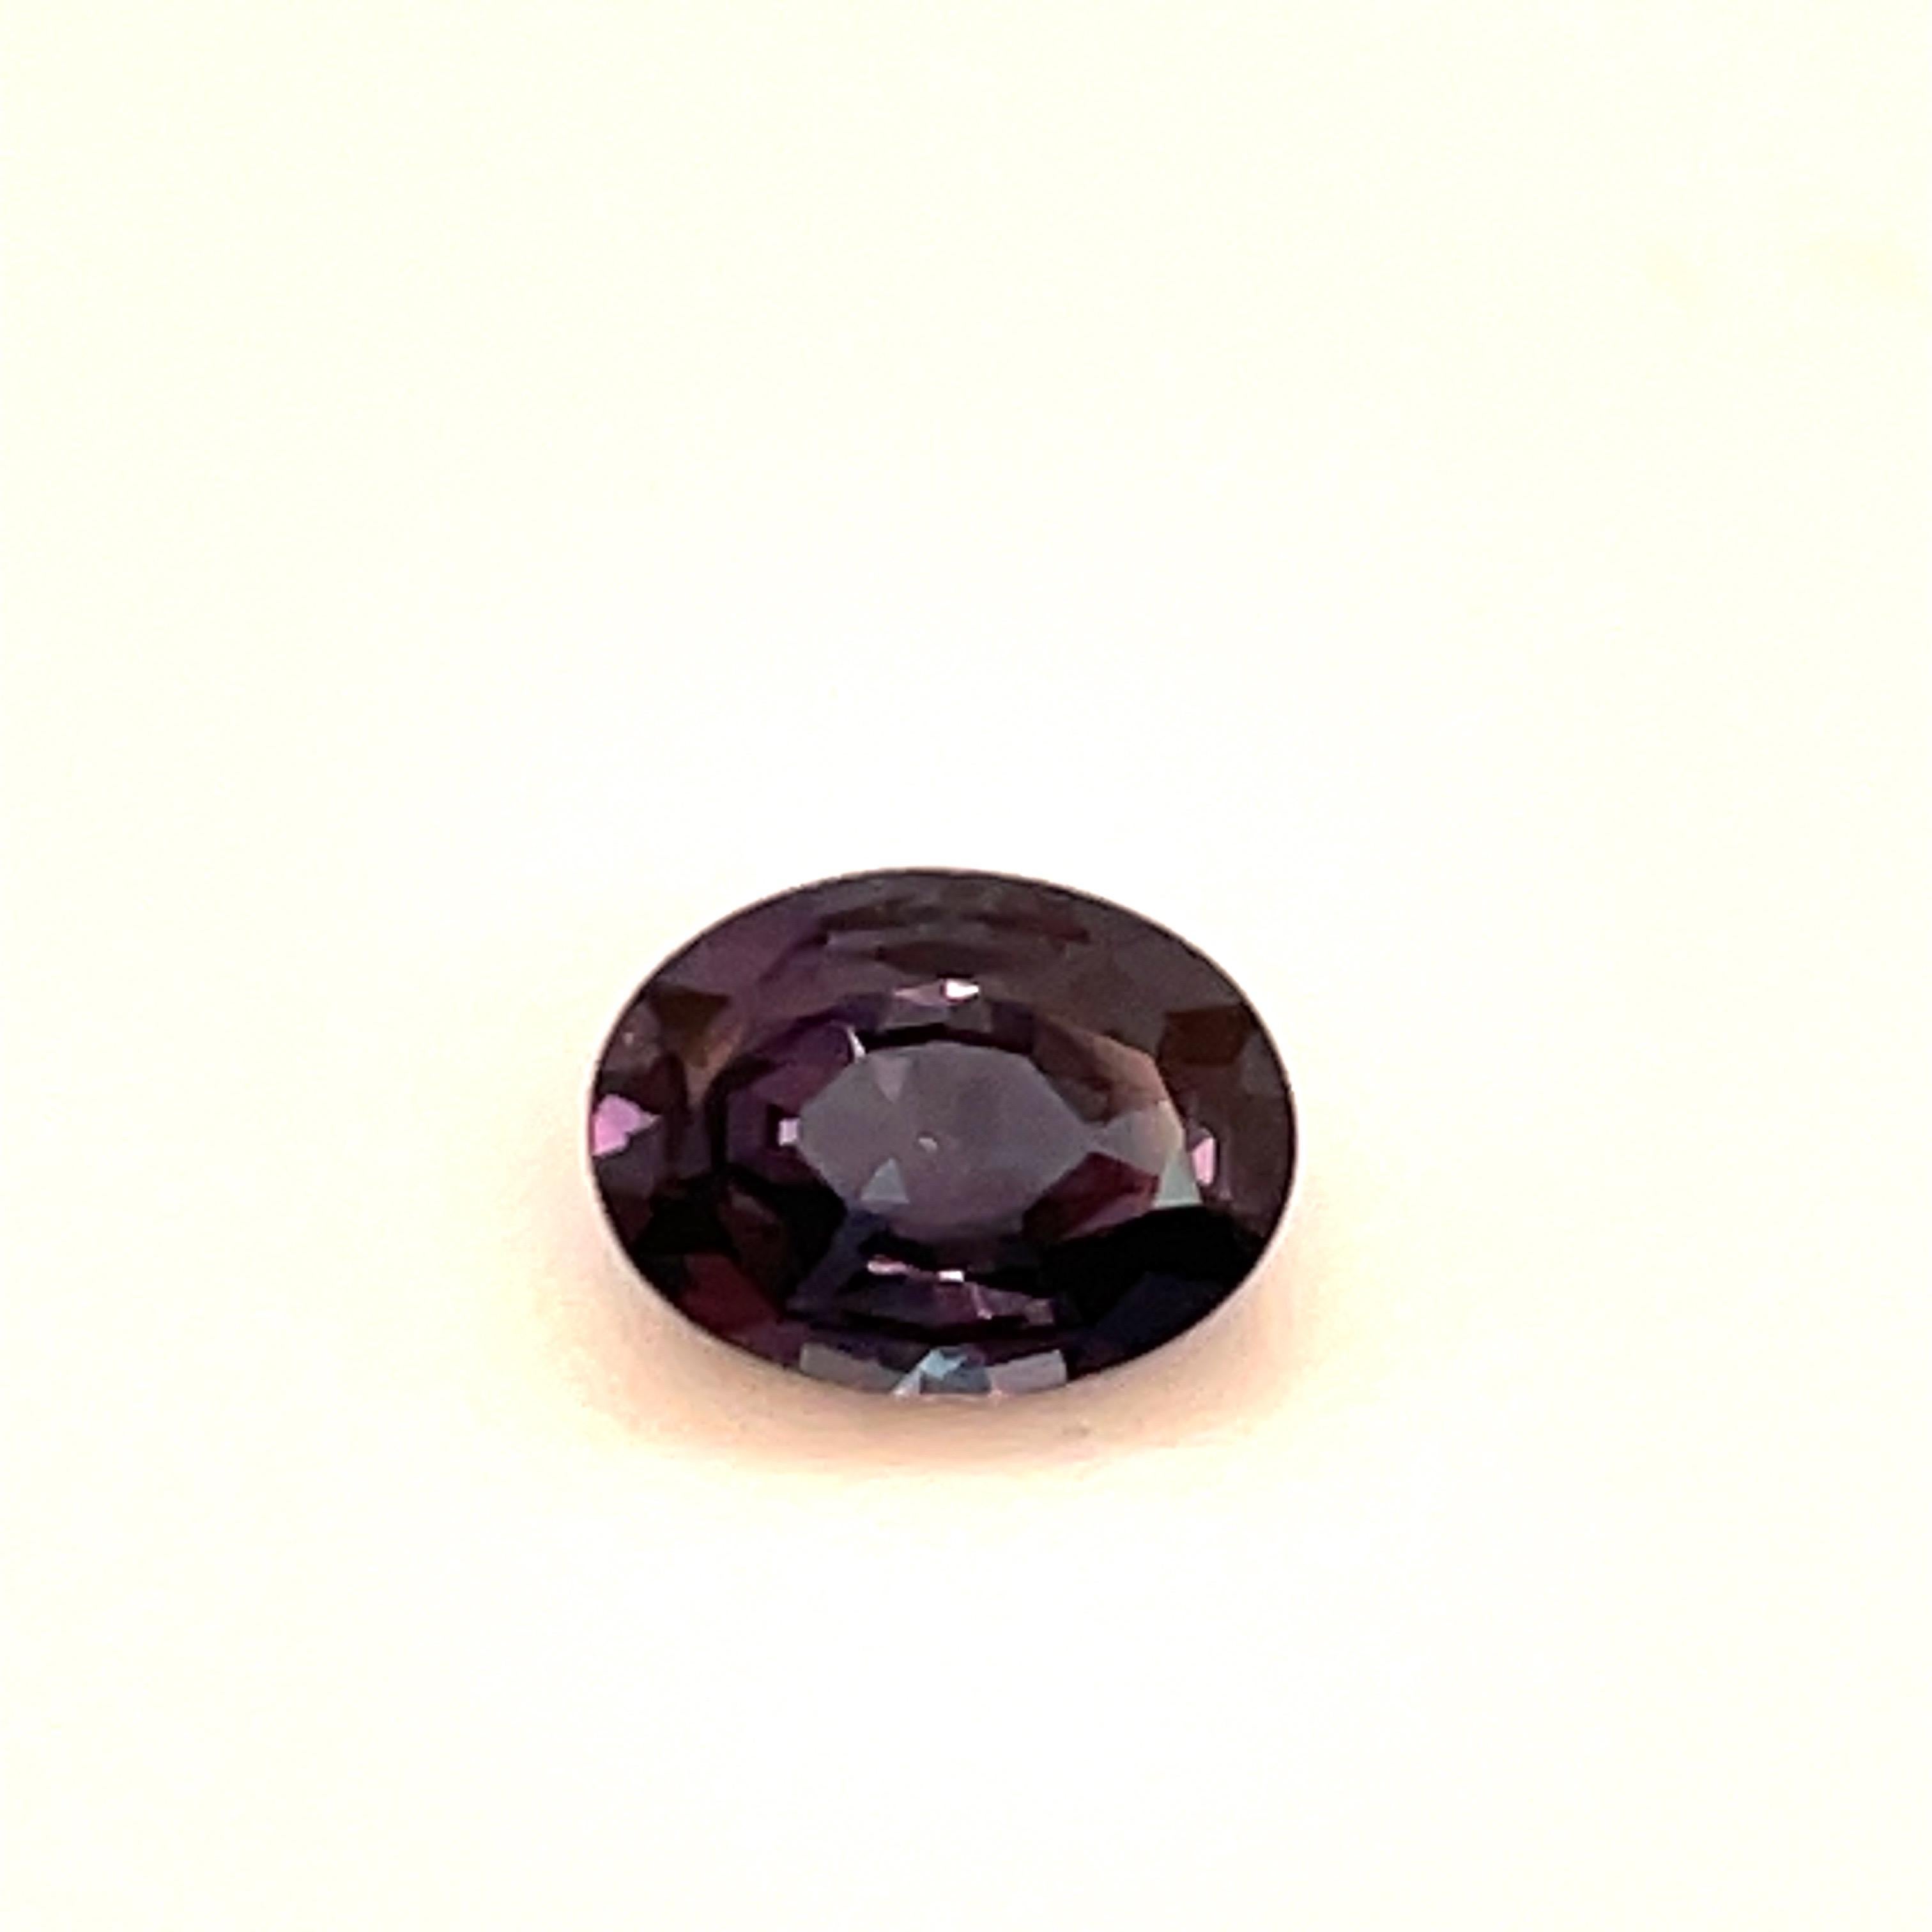 A lovely 1.12 Carat oval shape Alexandrite. Can be set in a ring or pendant. 
More shapes and sizes available. 
Email for inventory. 